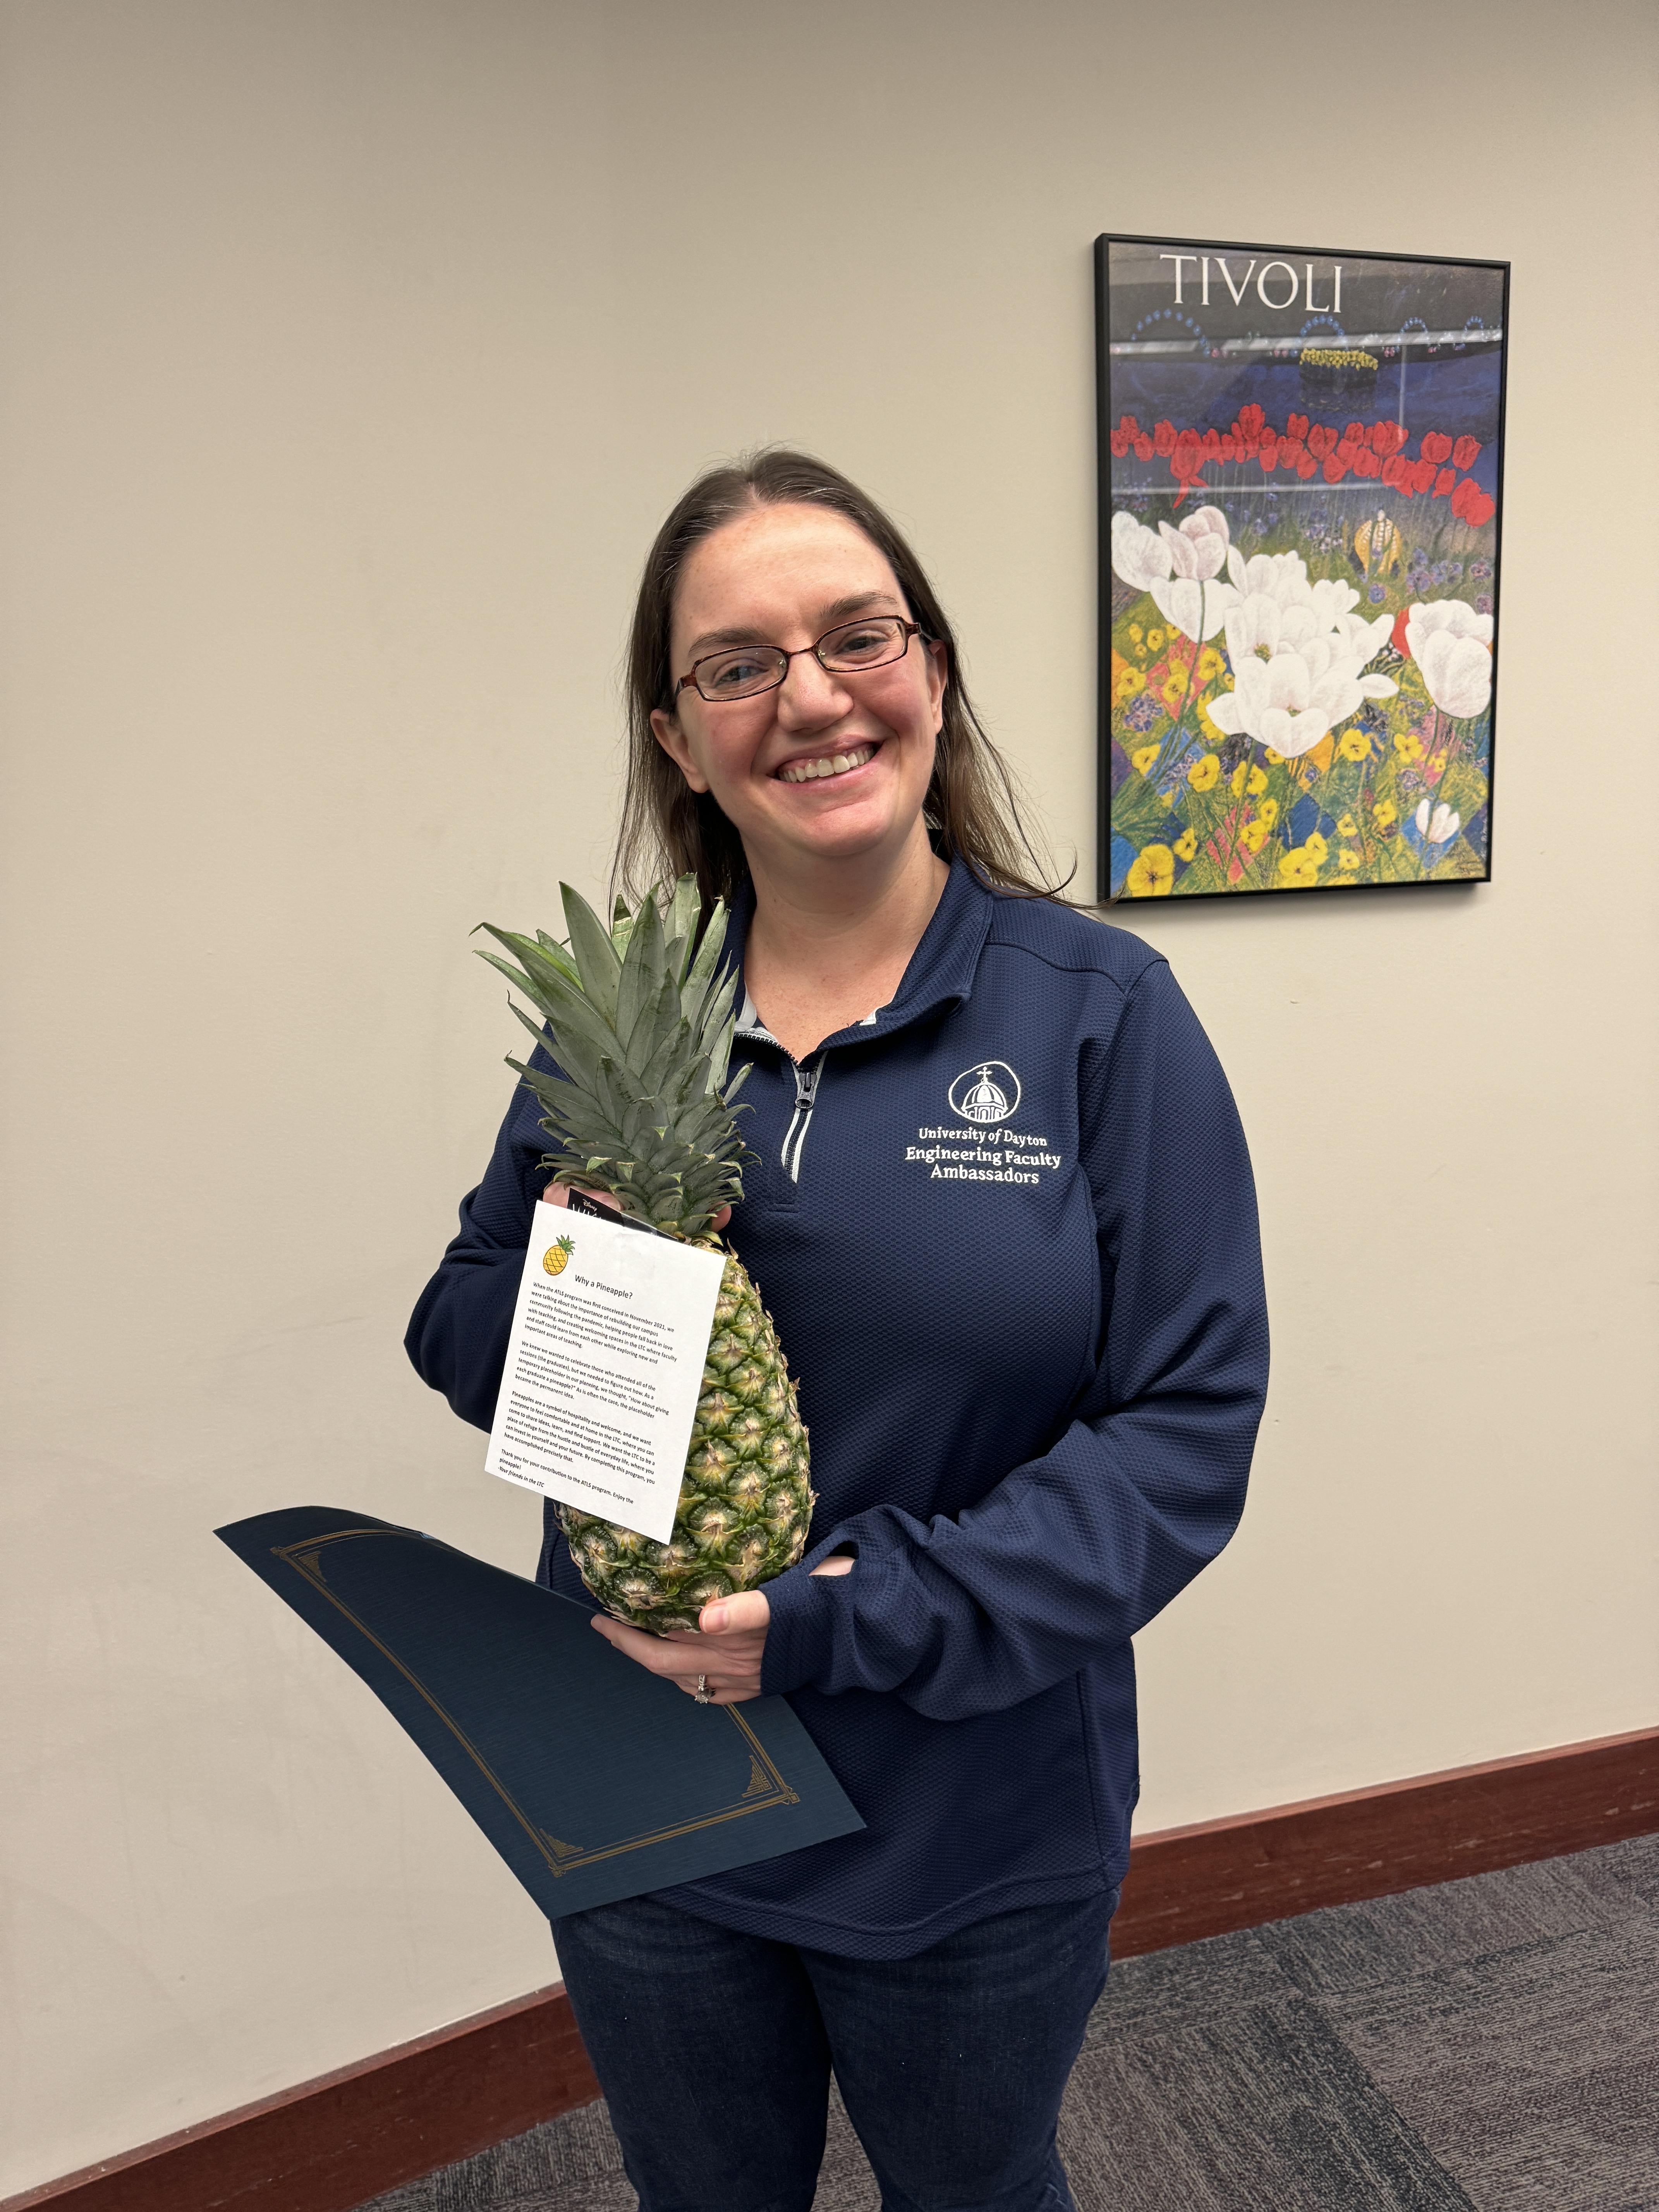 Faculty member Allison Kinney poses with a pineapple to signify graduation from ATLS.